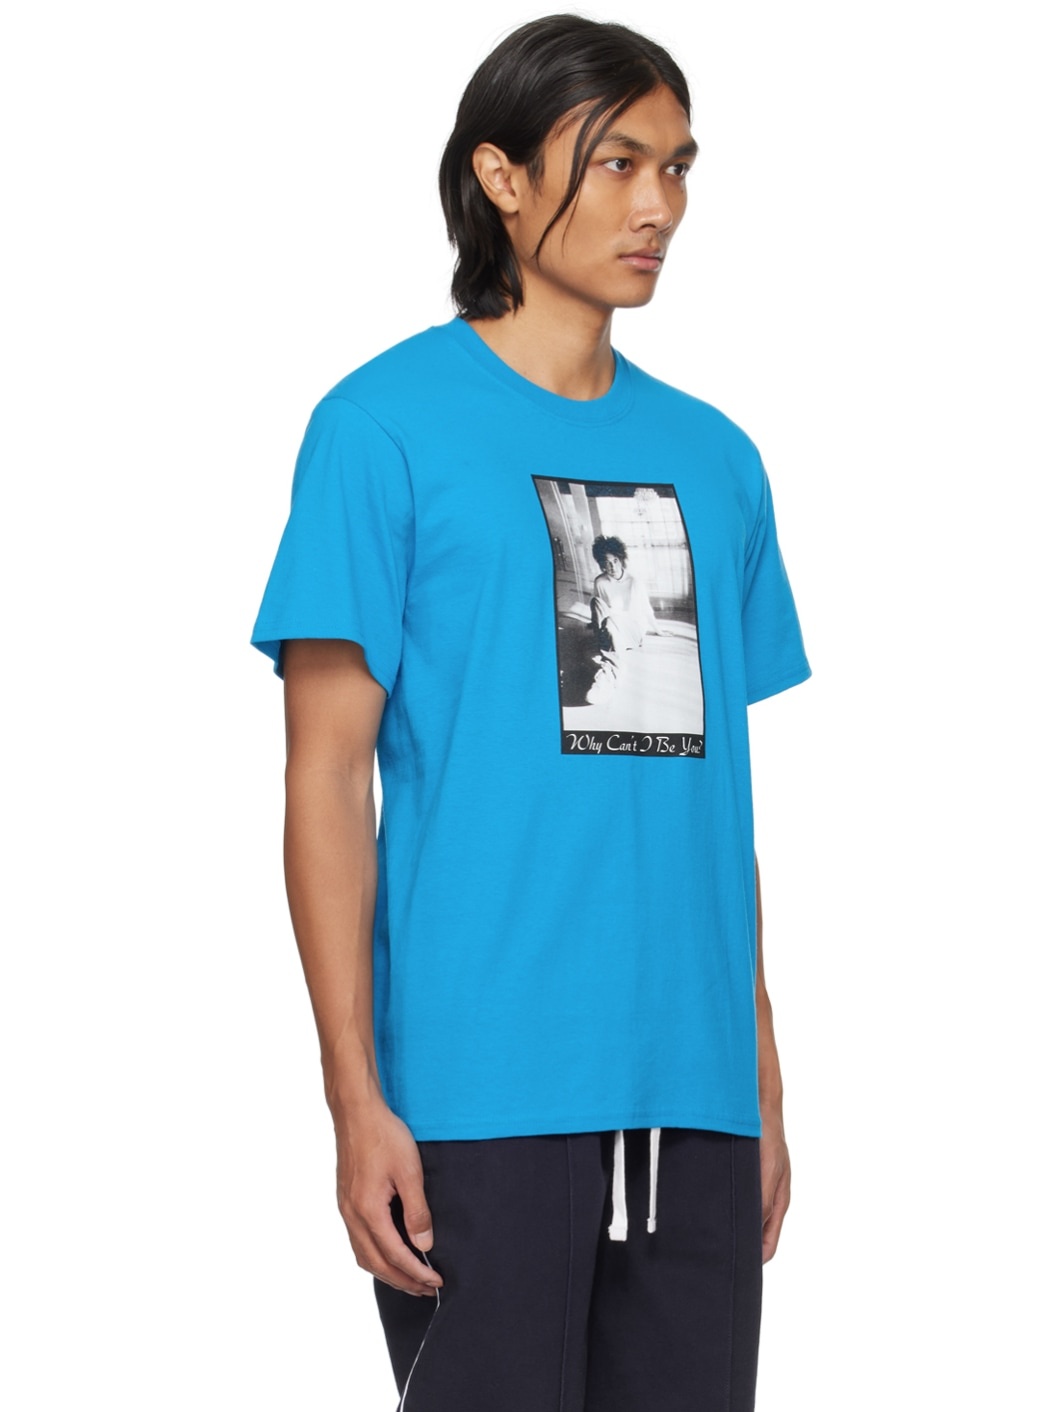 Blue 'Why Can't I Be You?' T-Shirt - 2